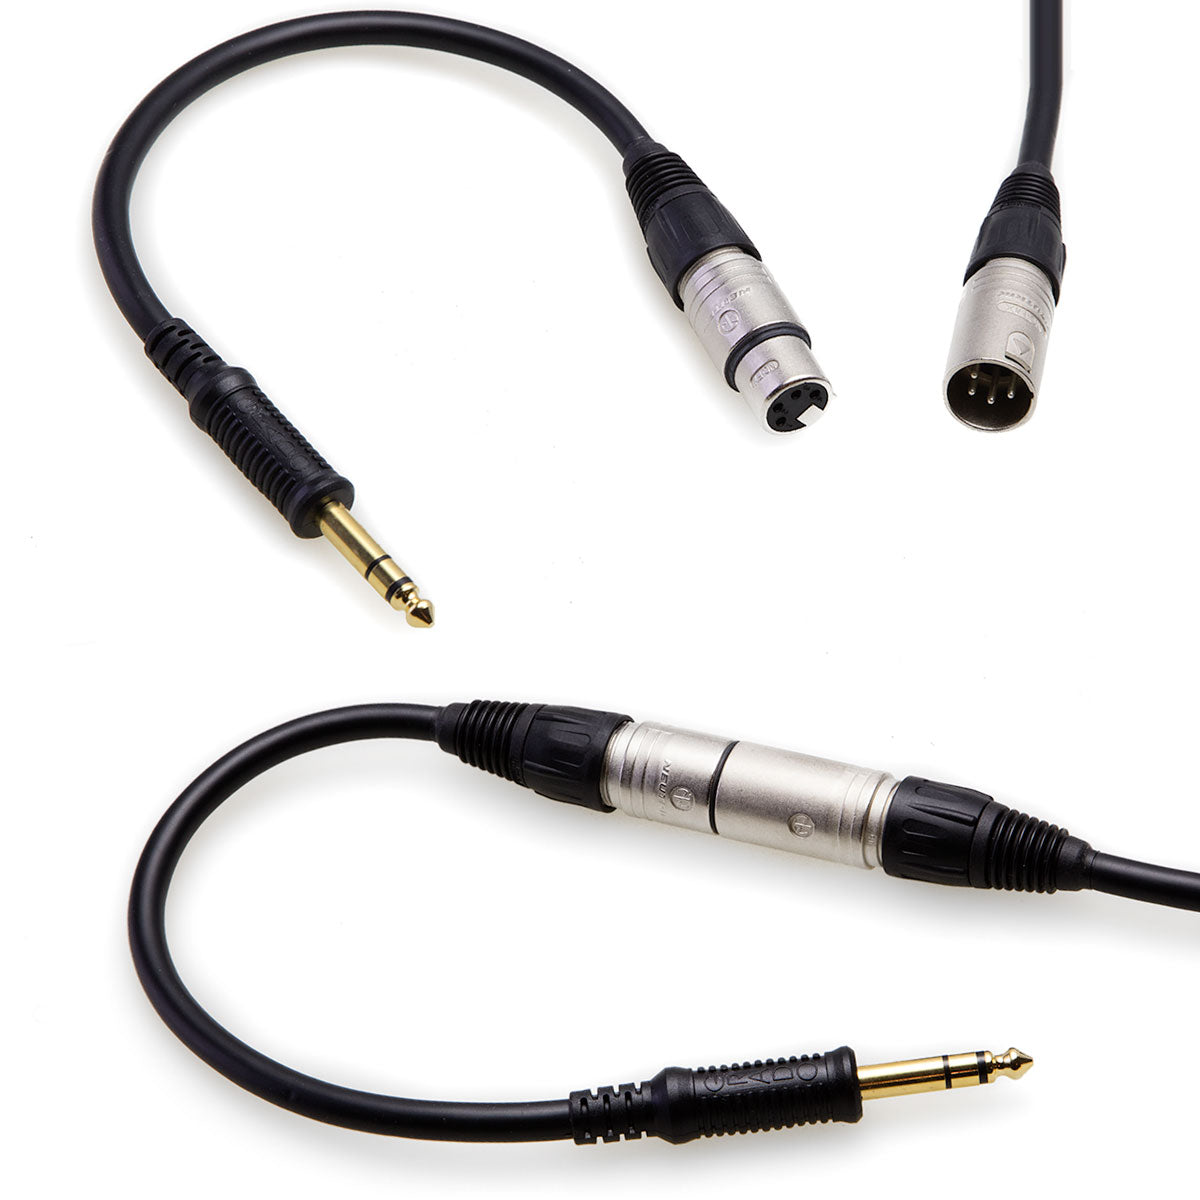 Terminate cable with XLR - XLR male and female connectors are inserted inline a few inches above the phono plug, so you can use it either way.